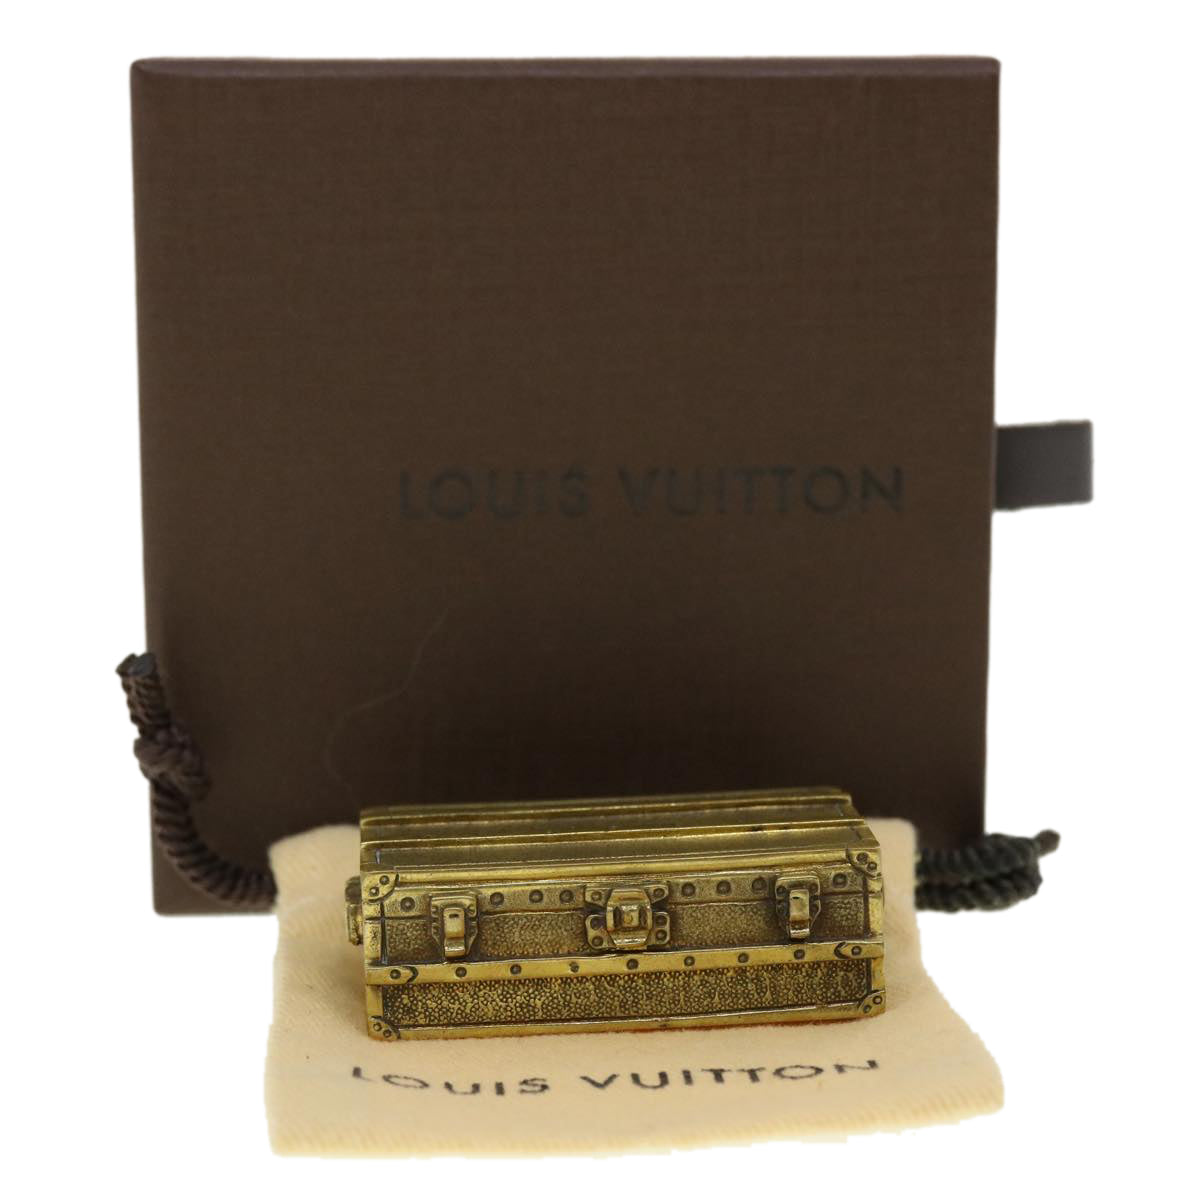 LOUIS VUITTON Paper Weight Metal Gold Tone LV Auth 41942